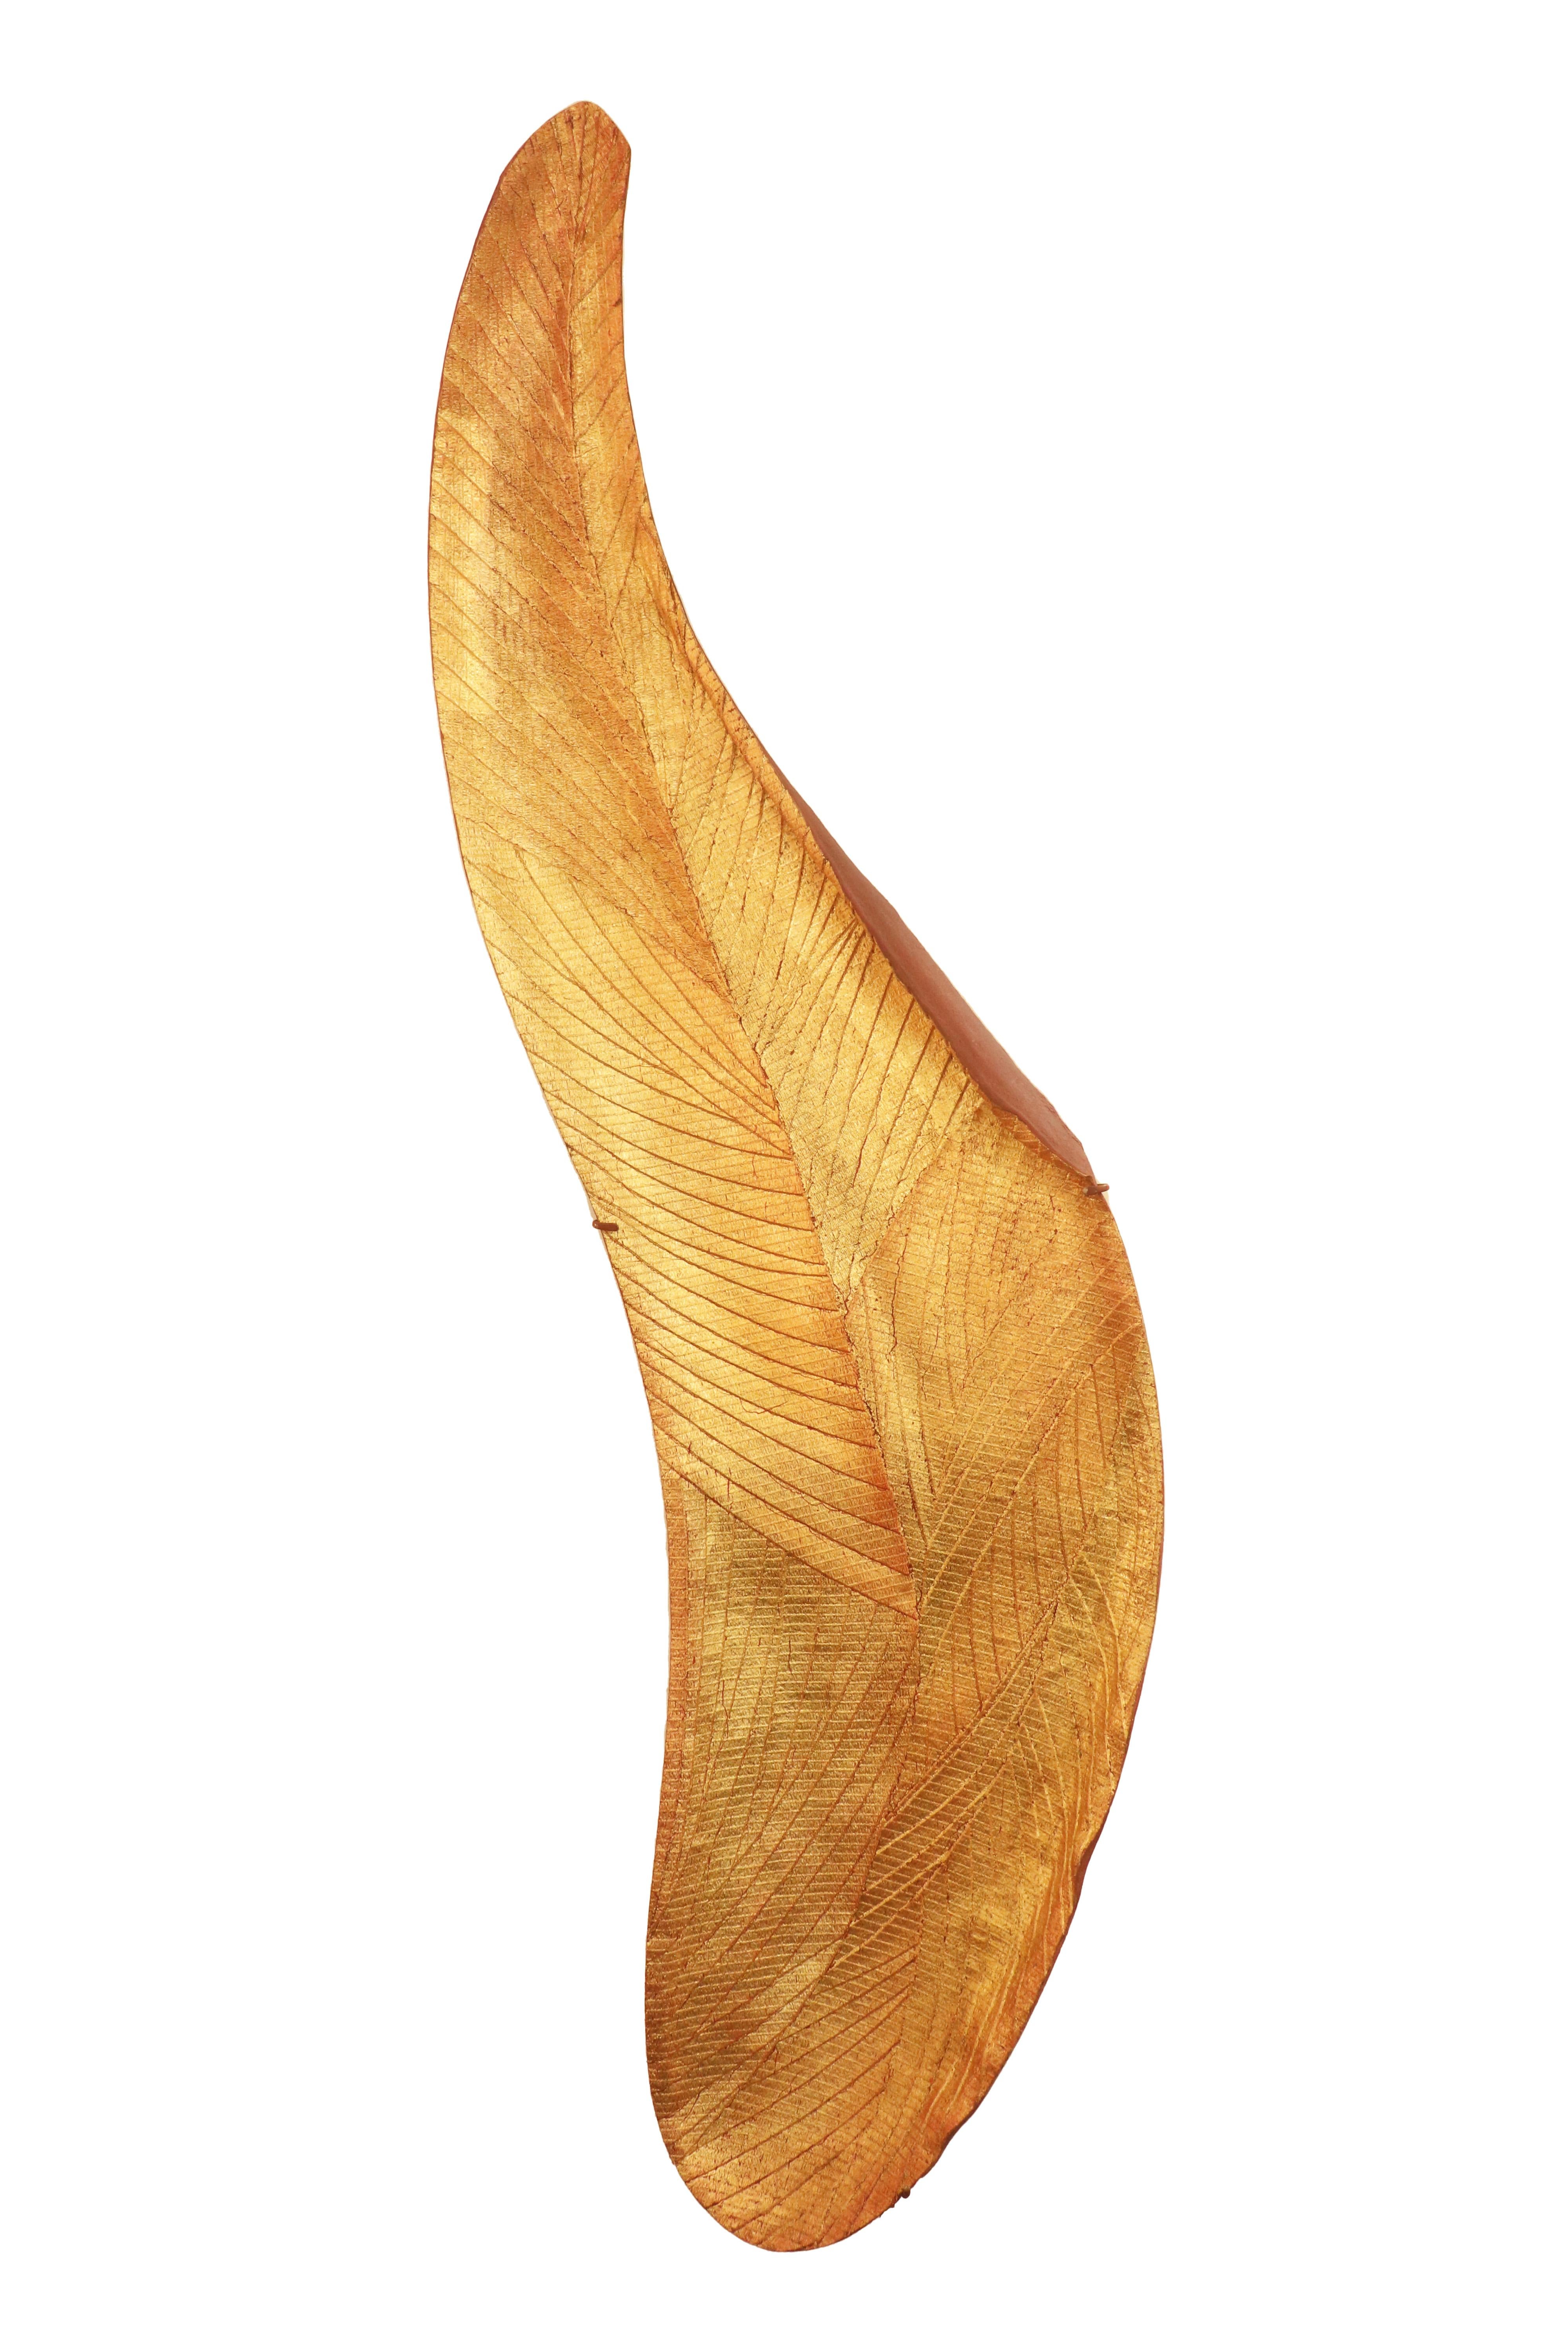 Furie is an artpiece made in 2019 by Vadim Garine. The weaving of gilded paper with copper leaf technique is used to create this sculpture. 
Dimensions: 84.25